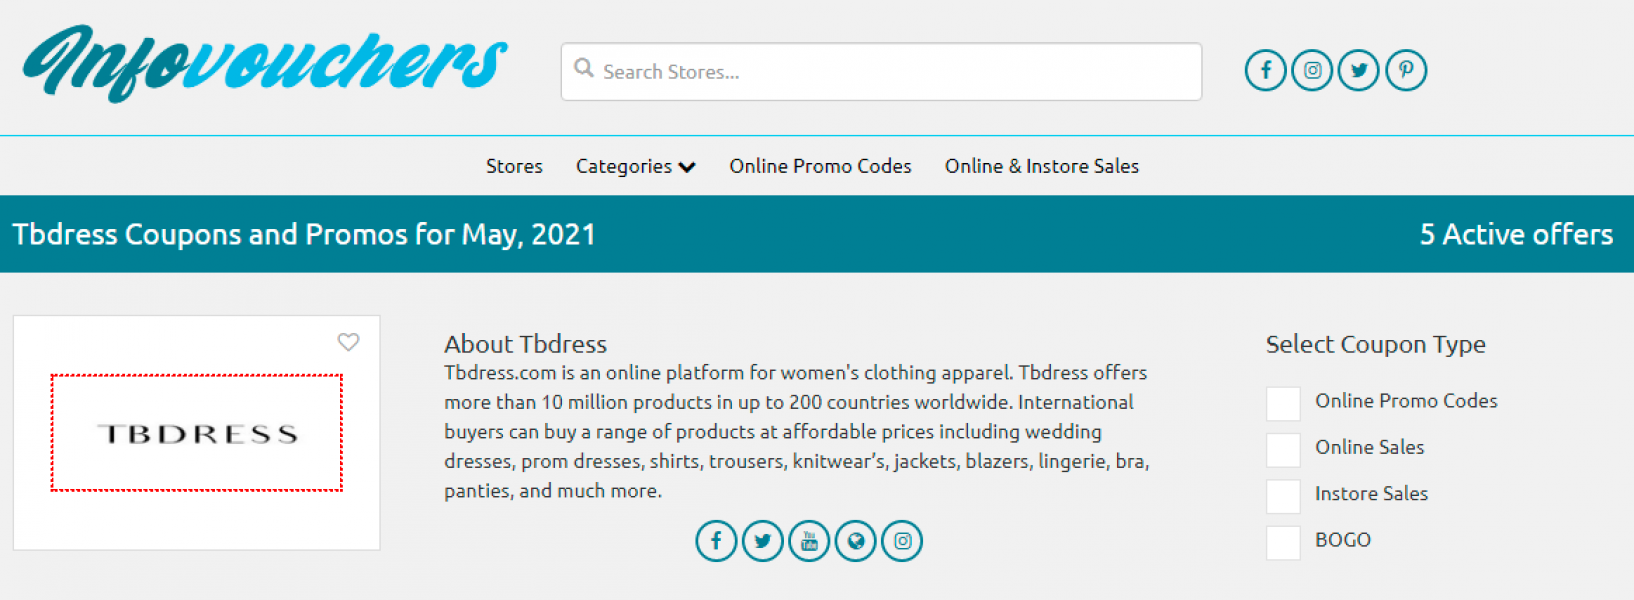 Get TBDress Discount Codes, Promo Codes & Deals By InfoVouchers 2021.